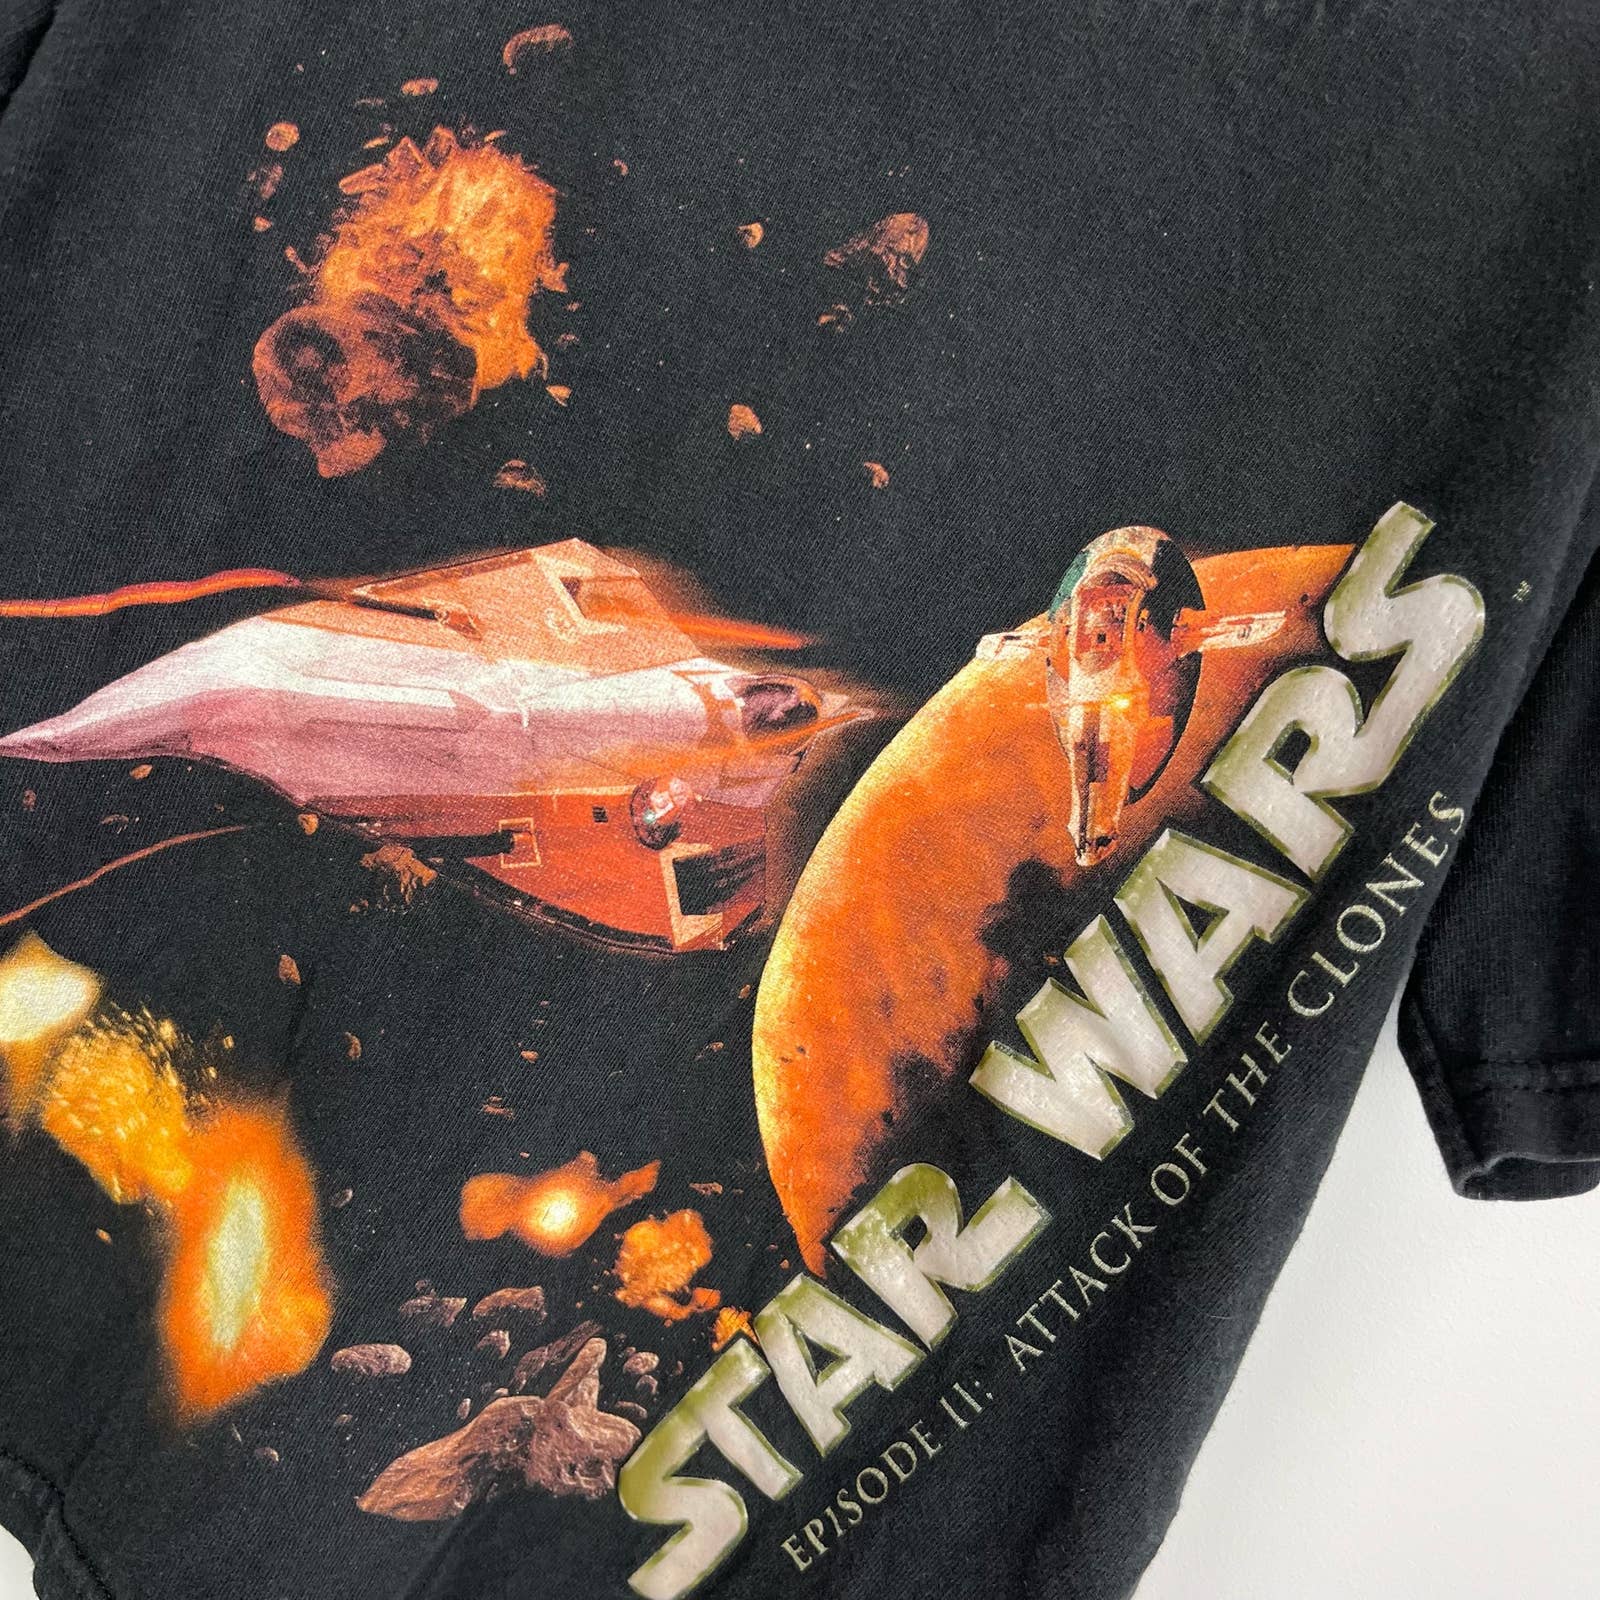 Star Wars Episode II: Attack of the Clones Tee Large